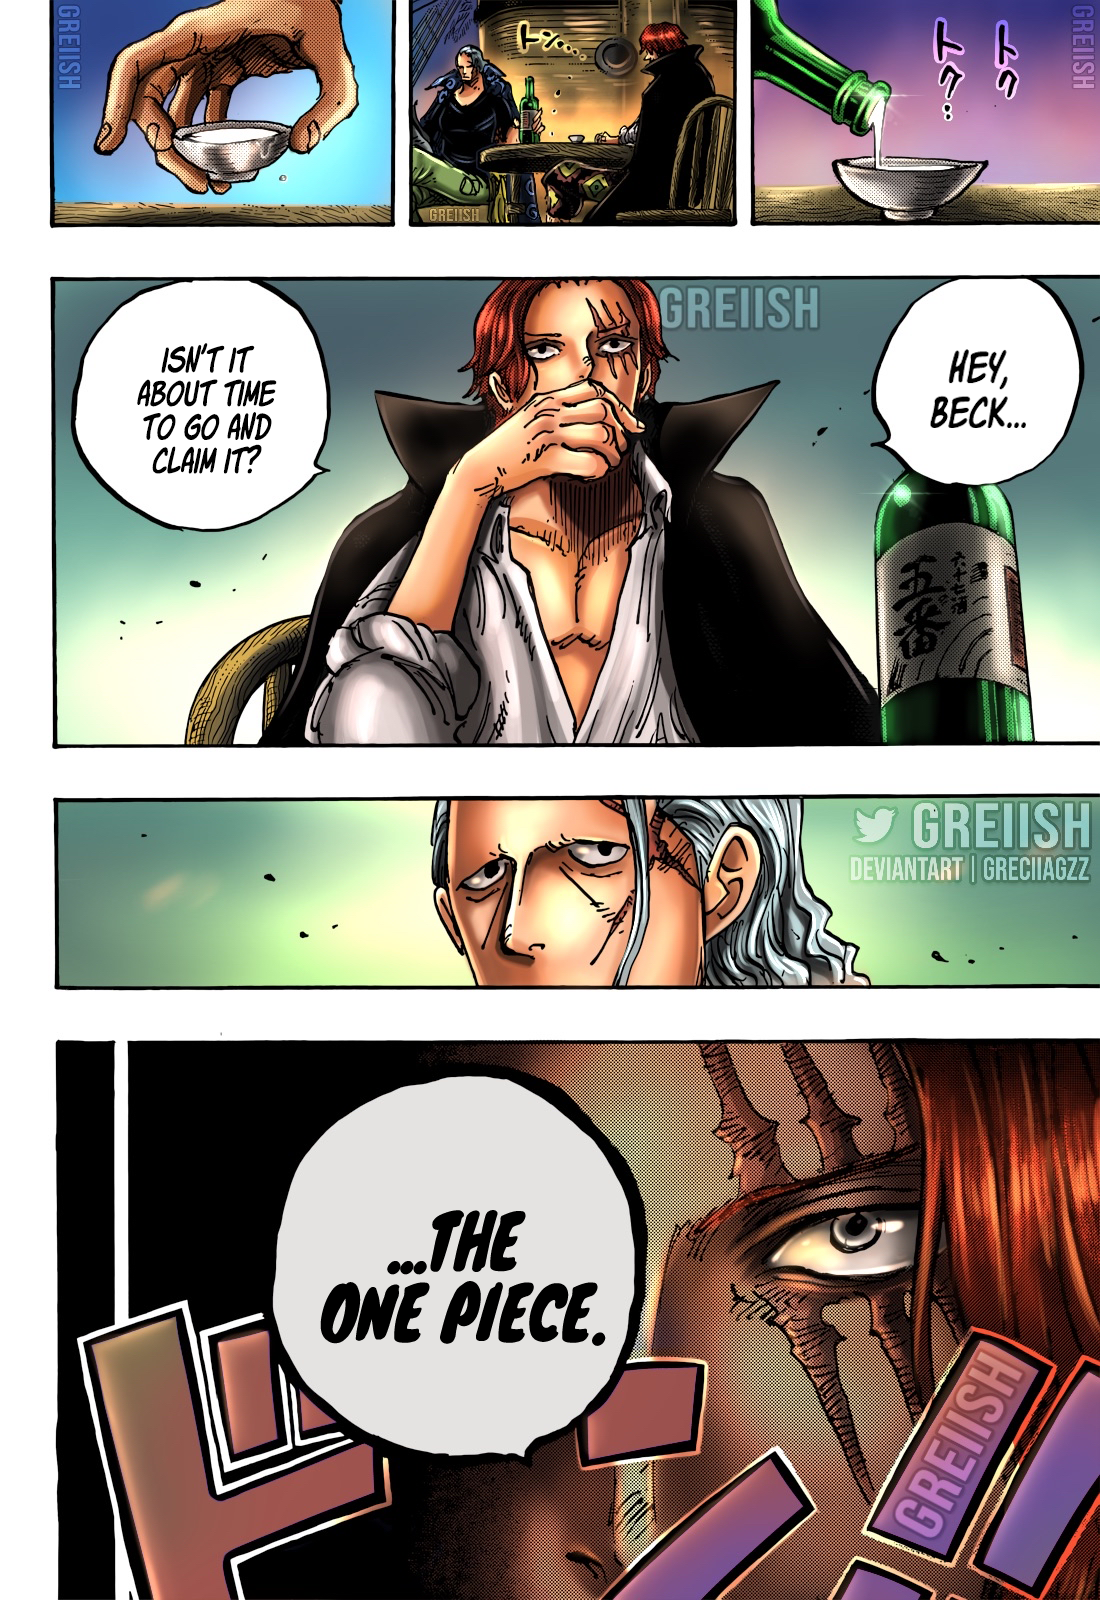 One Piece 1055 - Shanks by Melonciutus on DeviantArt